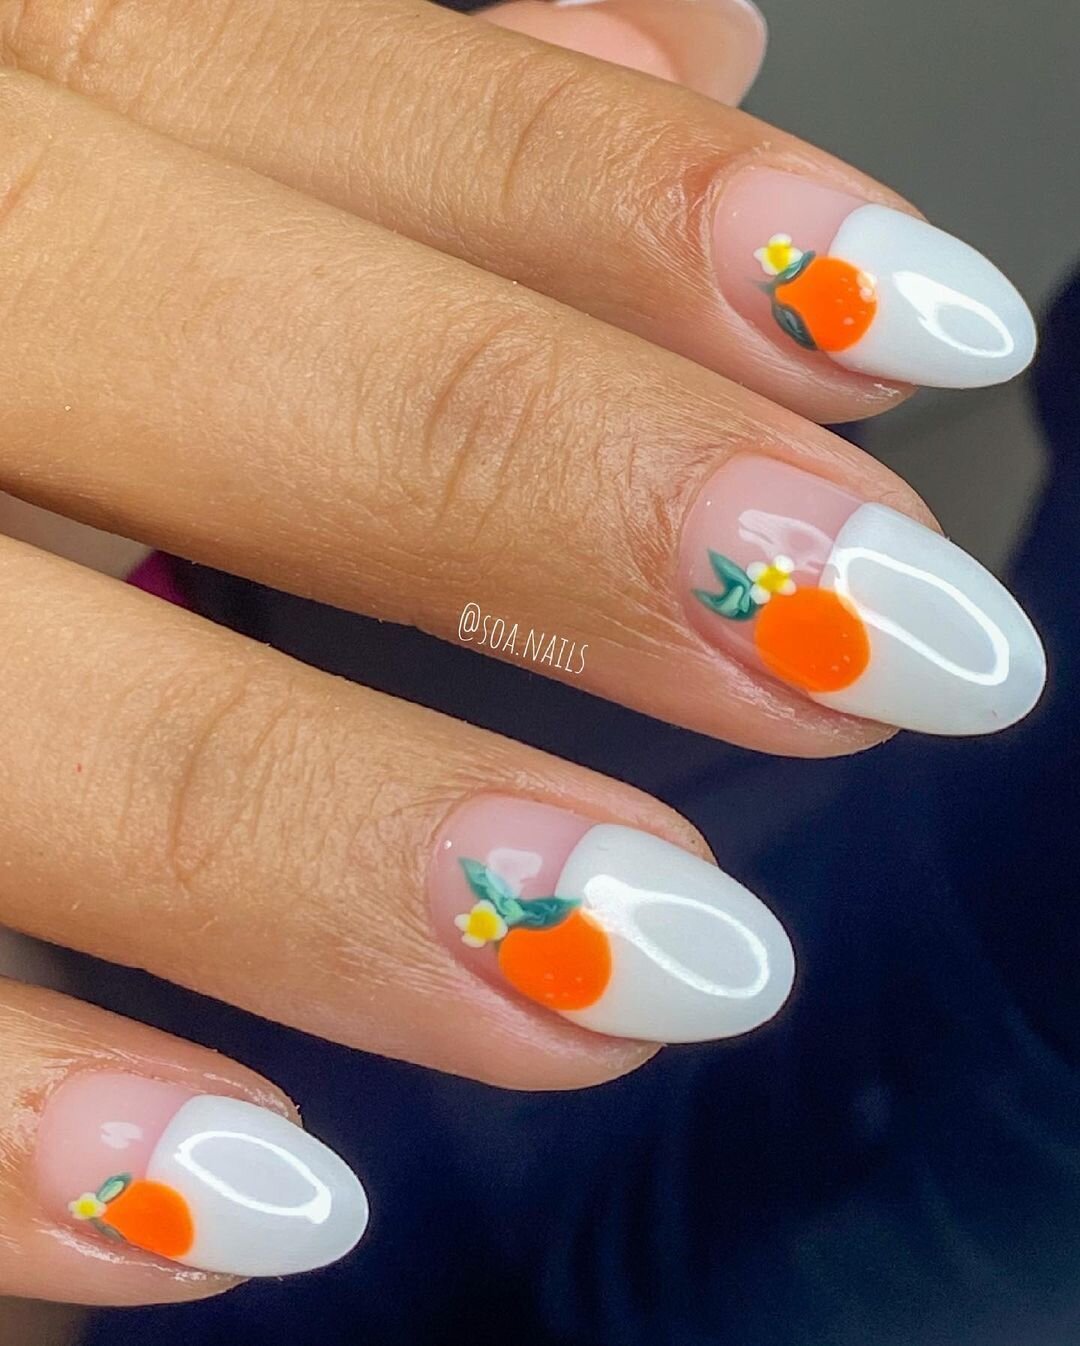 5. 15 Nail Designs Inspired by Your Favorite Summer Fruits